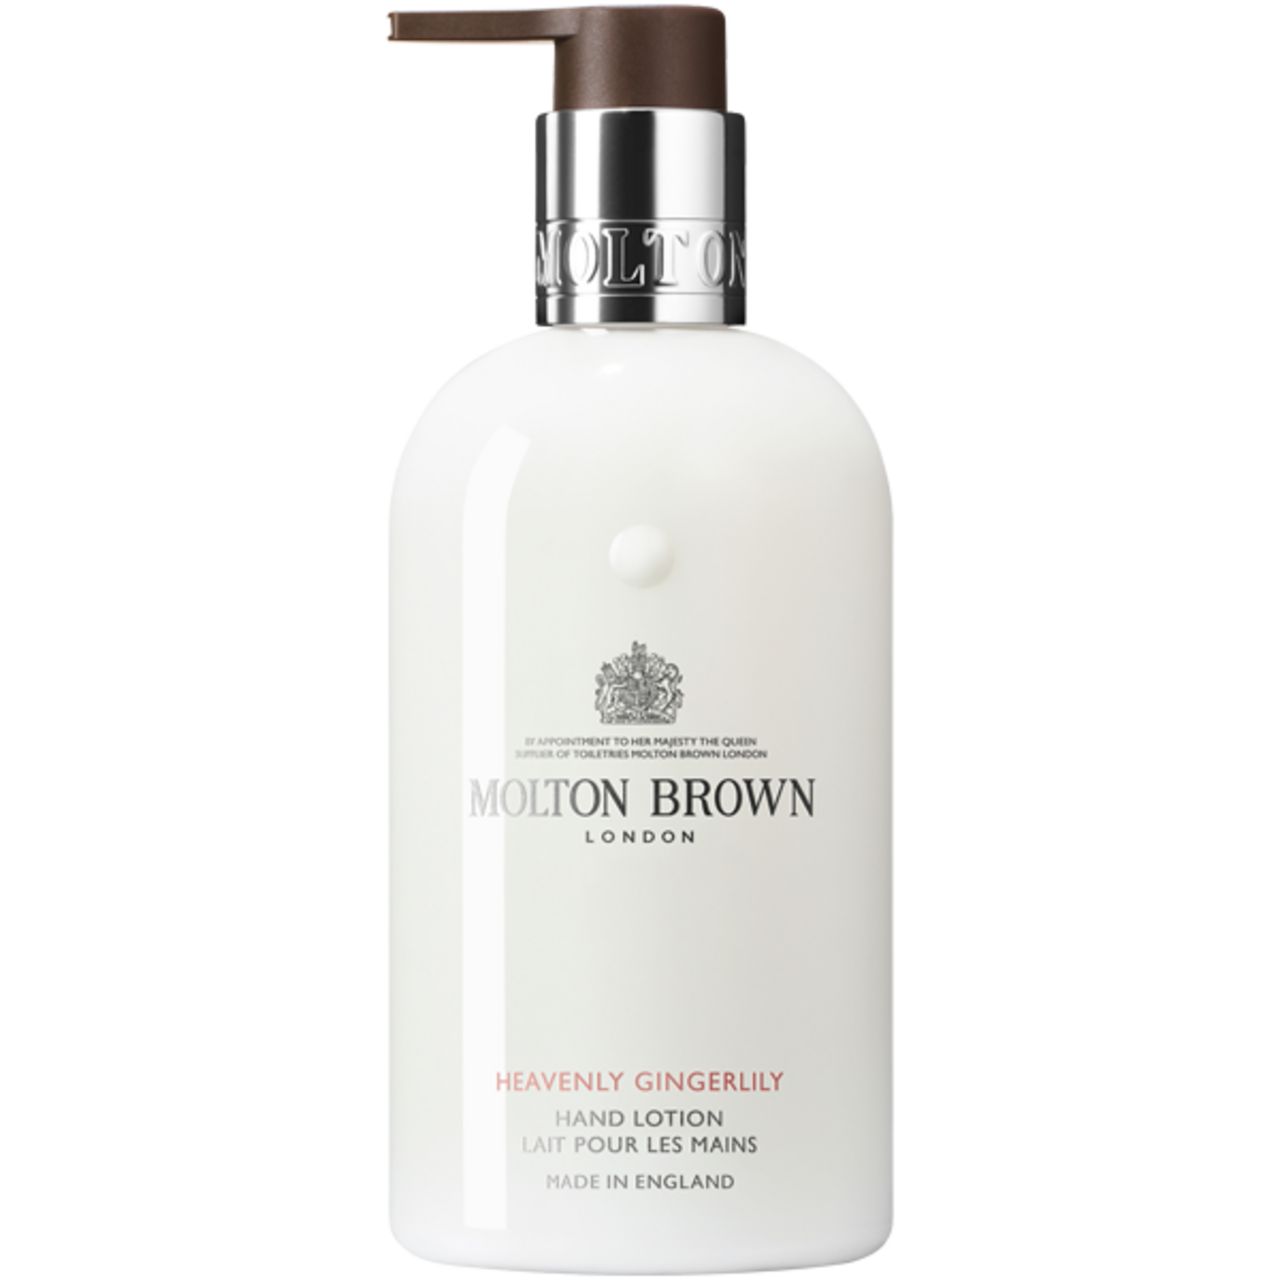 Molton Brown, Heavenly Gingerlily Hand Lotion